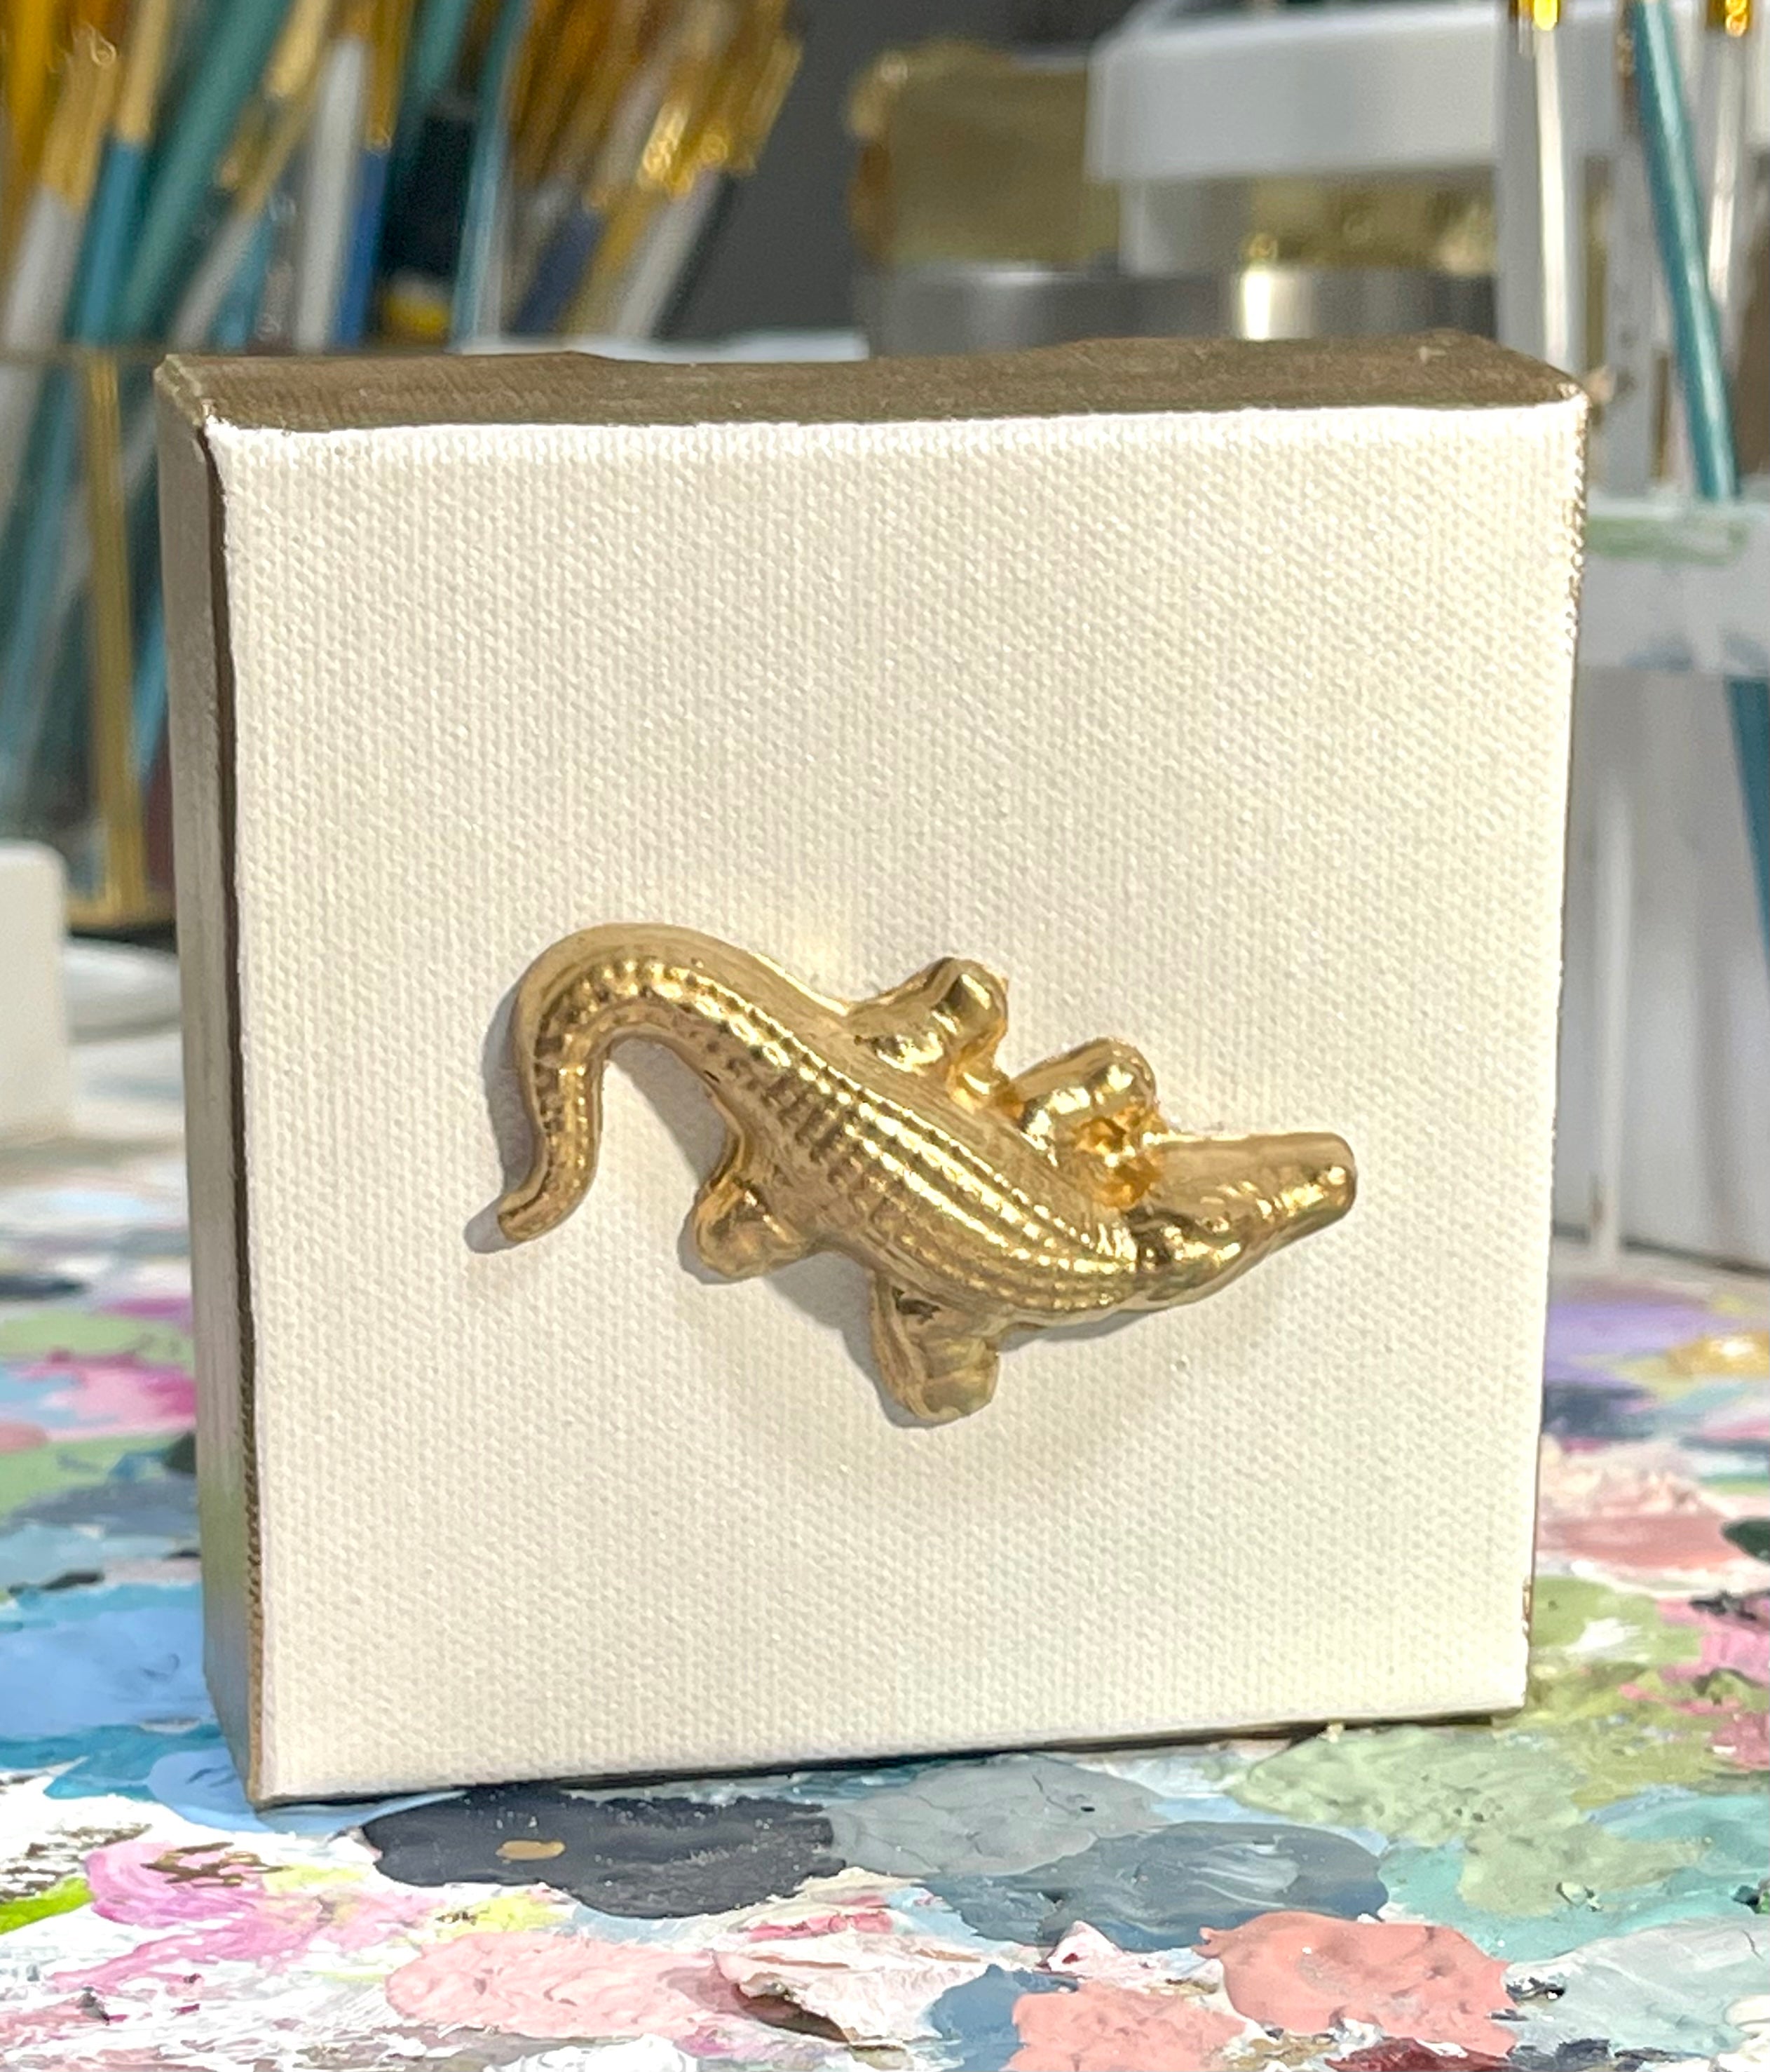 Alligator on 4x4 Canvas – LBourgeois Designs